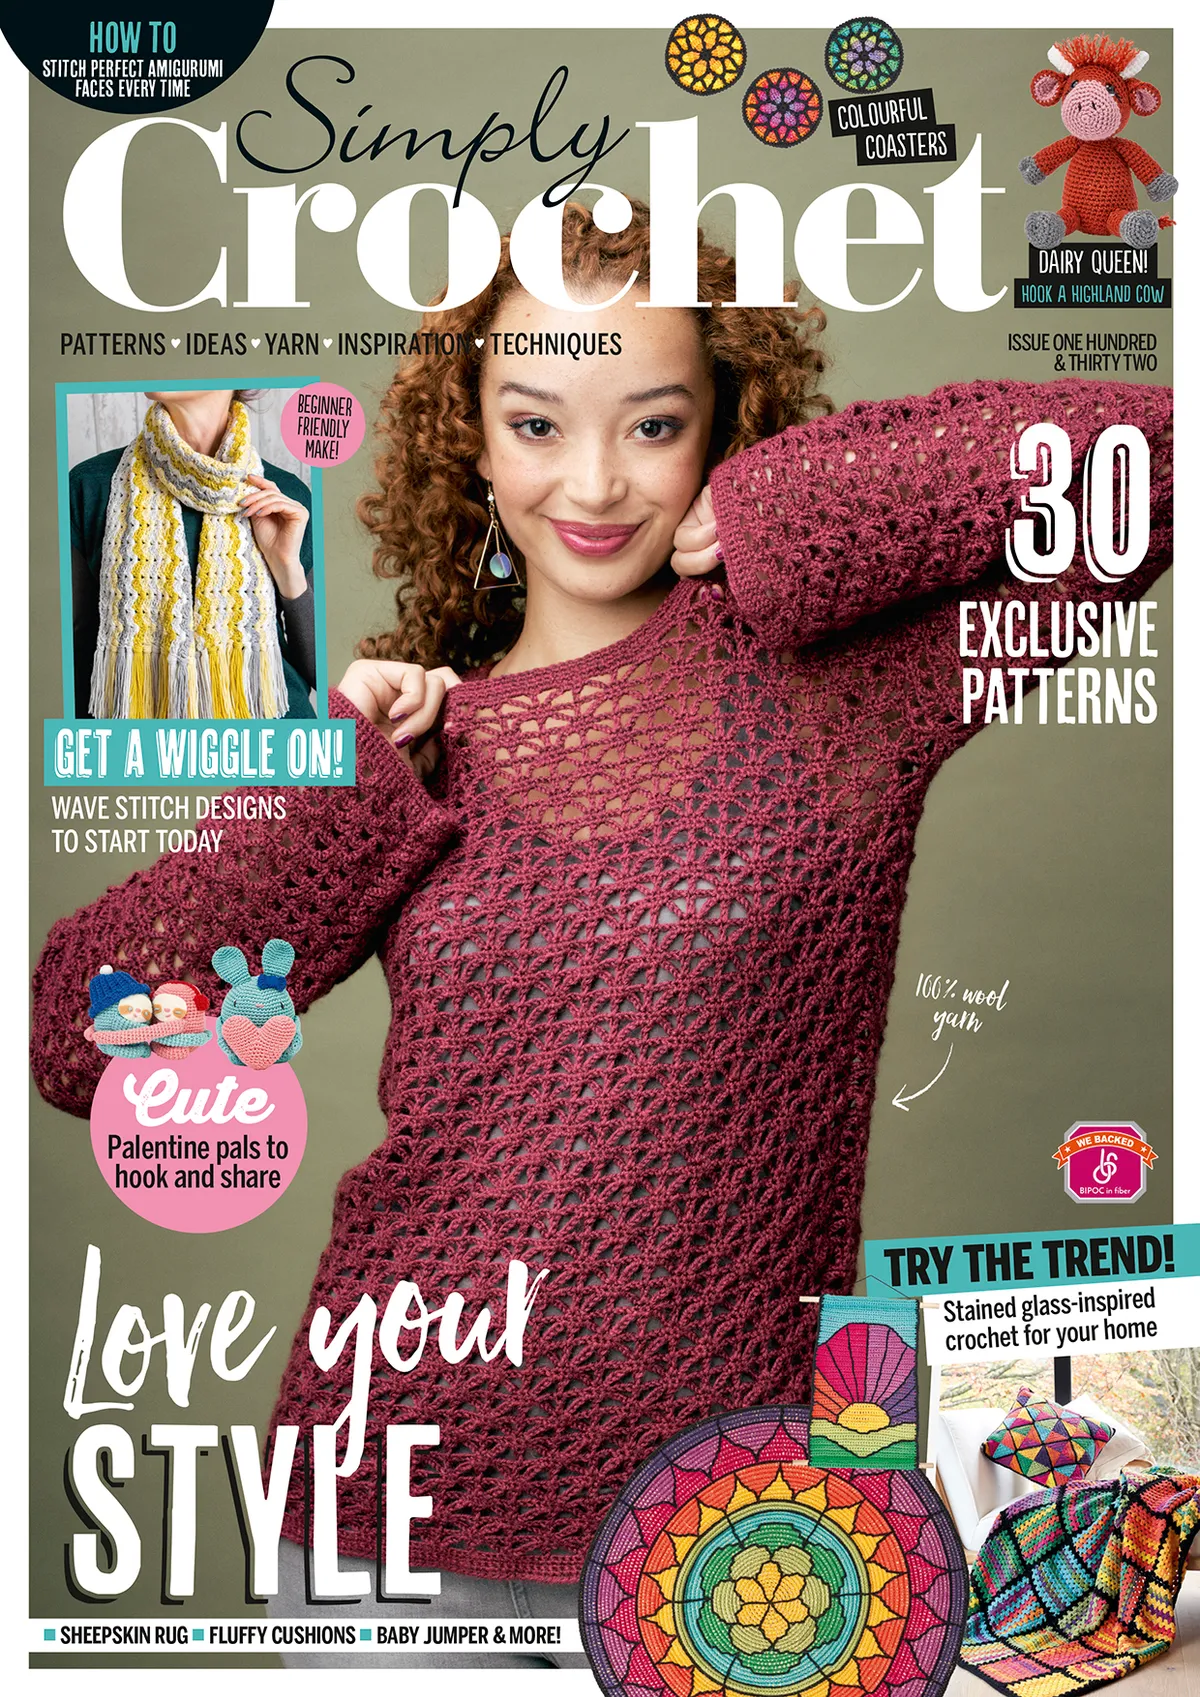 Simply Crochet issue 132